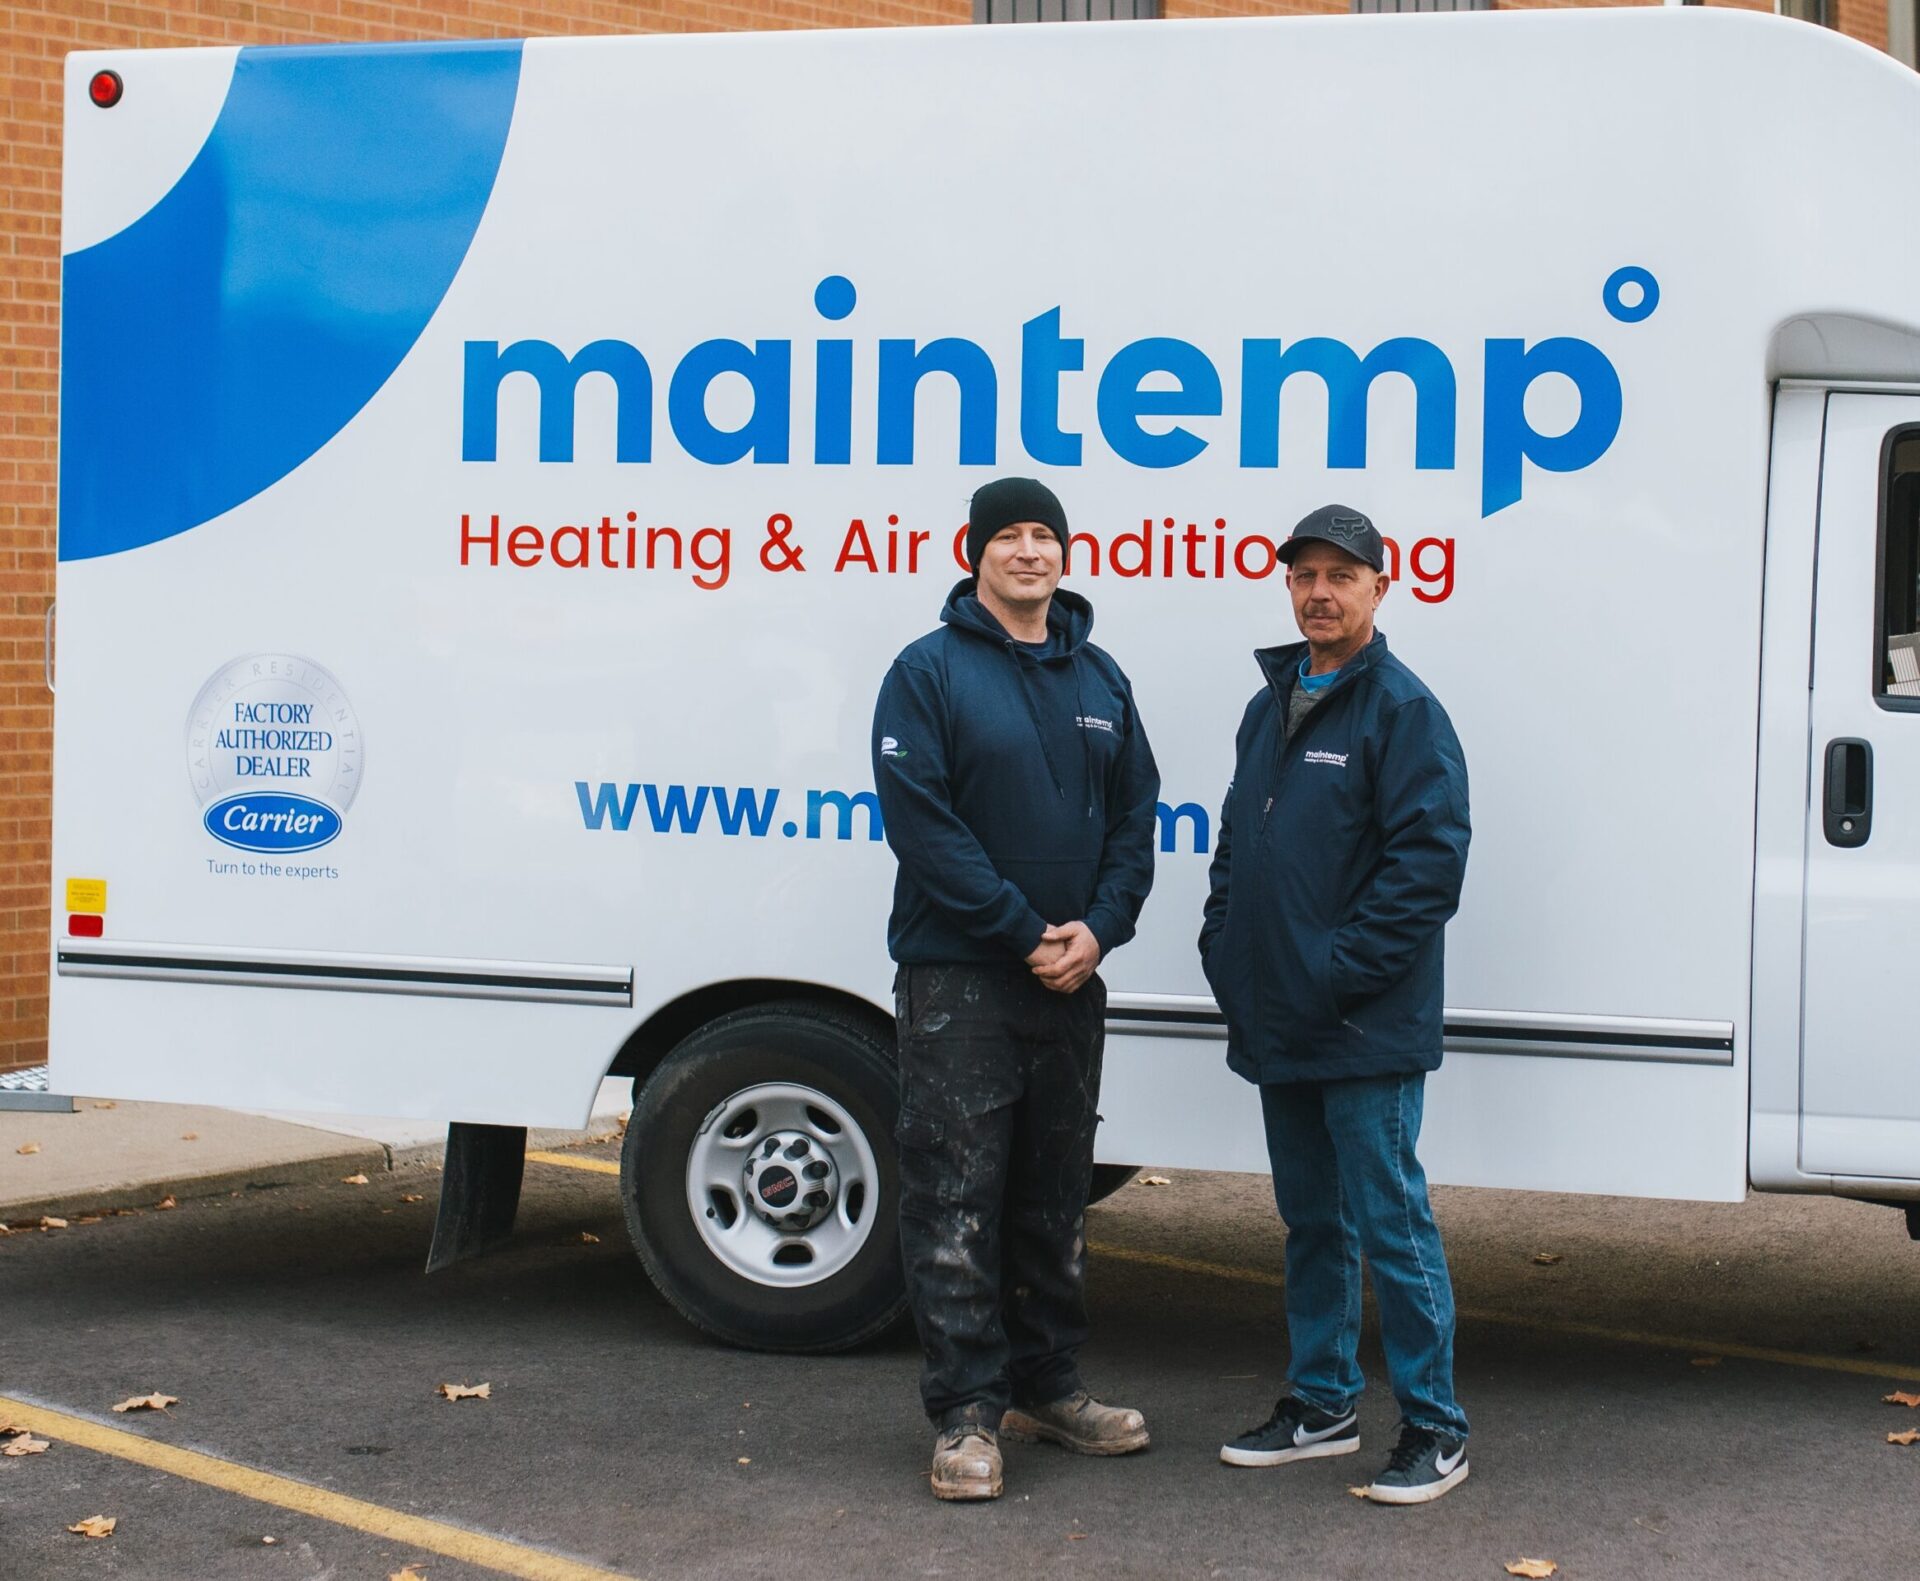 Two people are standing in front of a white van with "Maintemp Heating & Air Conditioning" logos, looking towards the camera with a brick building behind them.